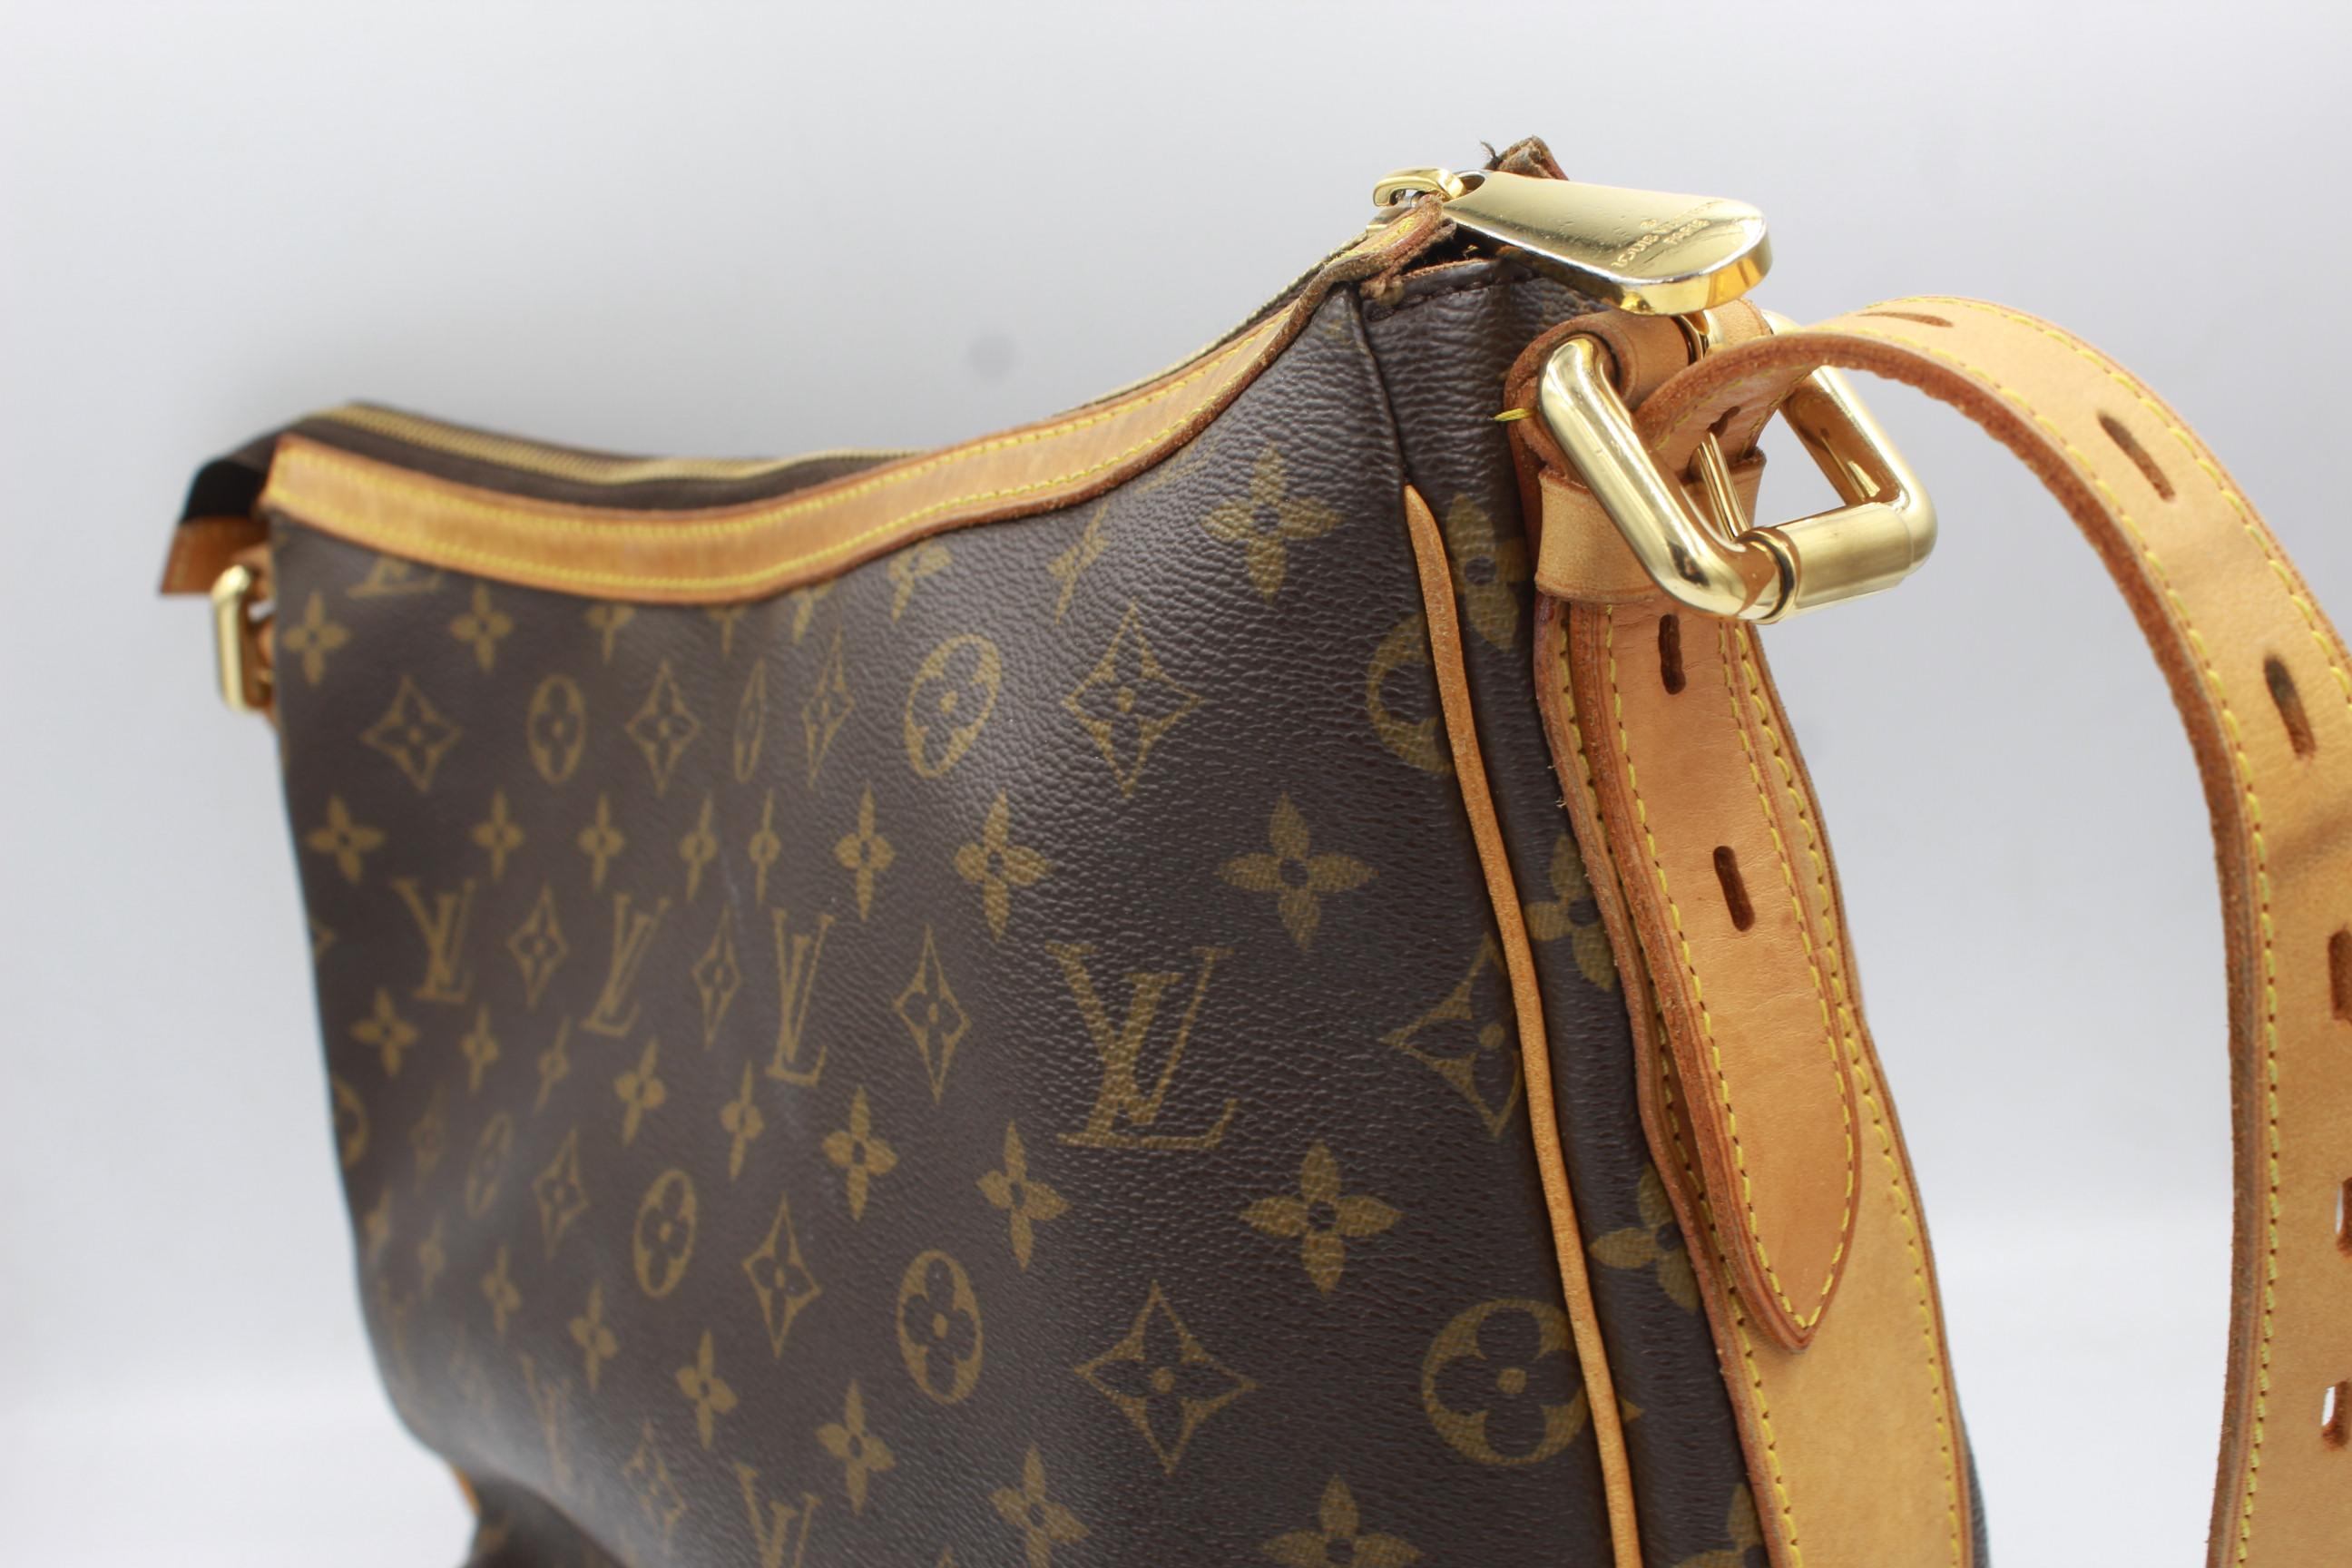 Louis Vuitton Tulum handbag in monogram canvas.
Good condition, with some signs of wear on the leather and discolouration stain on the clasp
Shoulder bag, can be wear cross body thanks to its adjustable strap. 
28cm x 33cm x 8cm